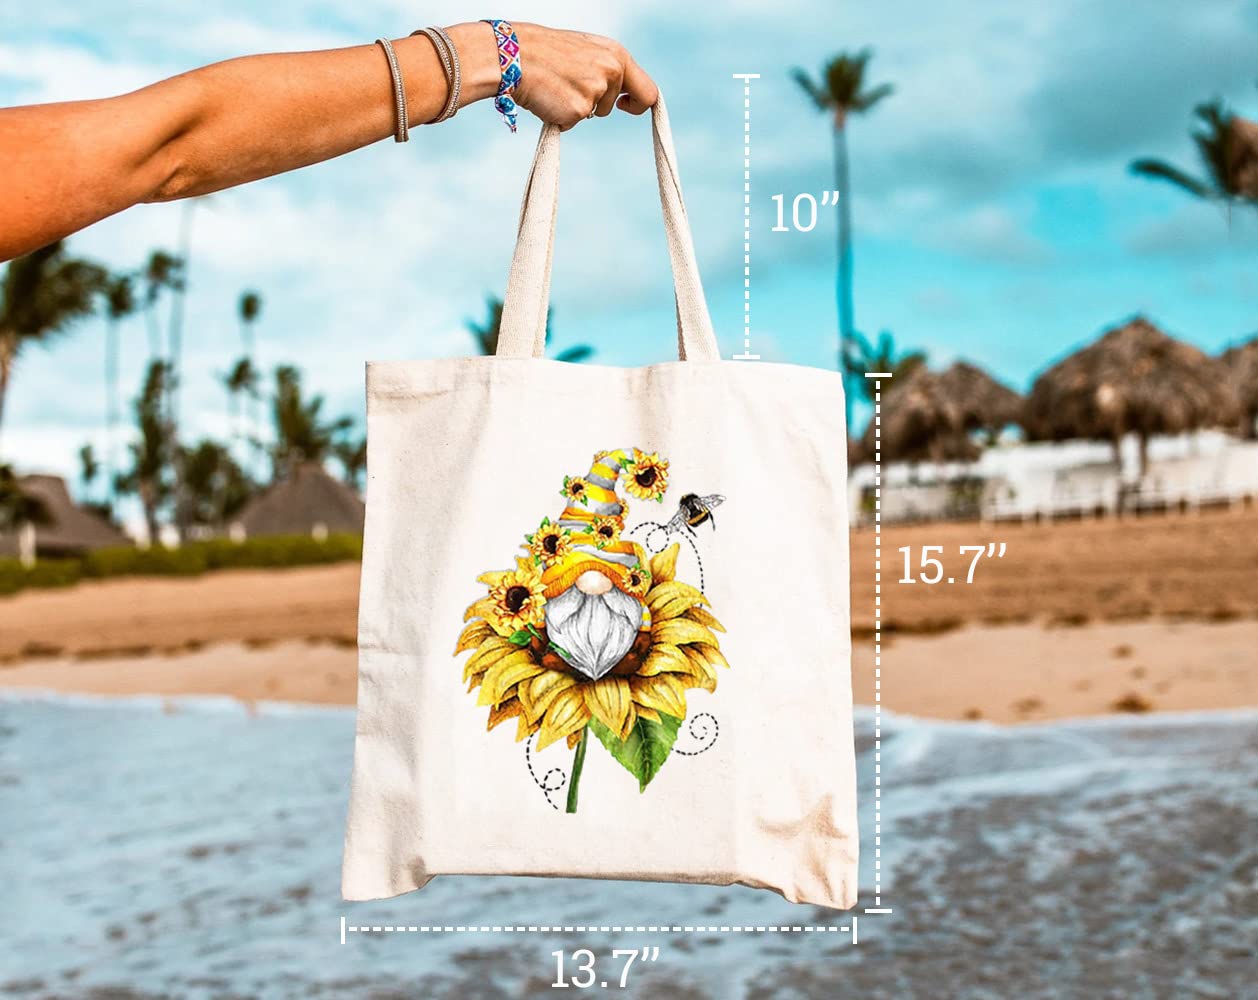 GXVUIS Canvas Tote Bag for Women Aesthetic Sunflower Gnome Reusable Grocery Shoulder Shopping Bags Girls Gifts White